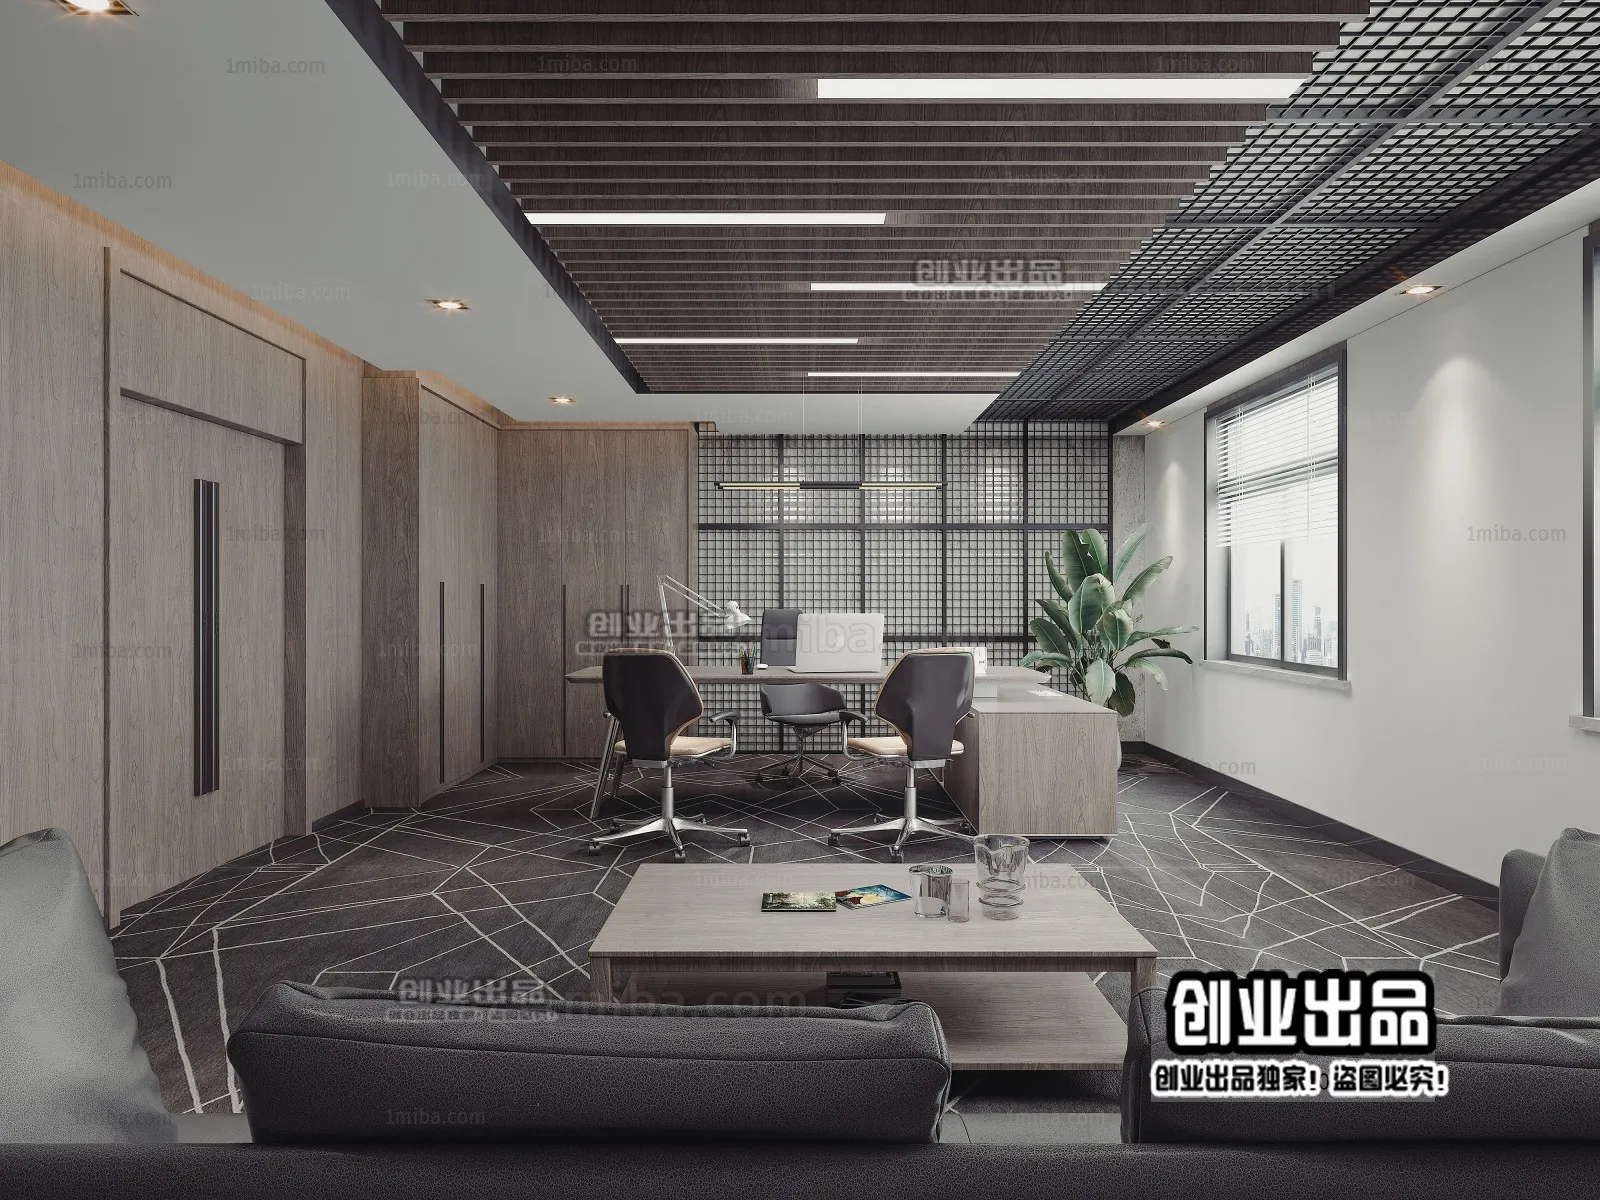 3D OFFICE INTERIOR (VRAY) – MANAGER ROOM 3D SCENES – 033